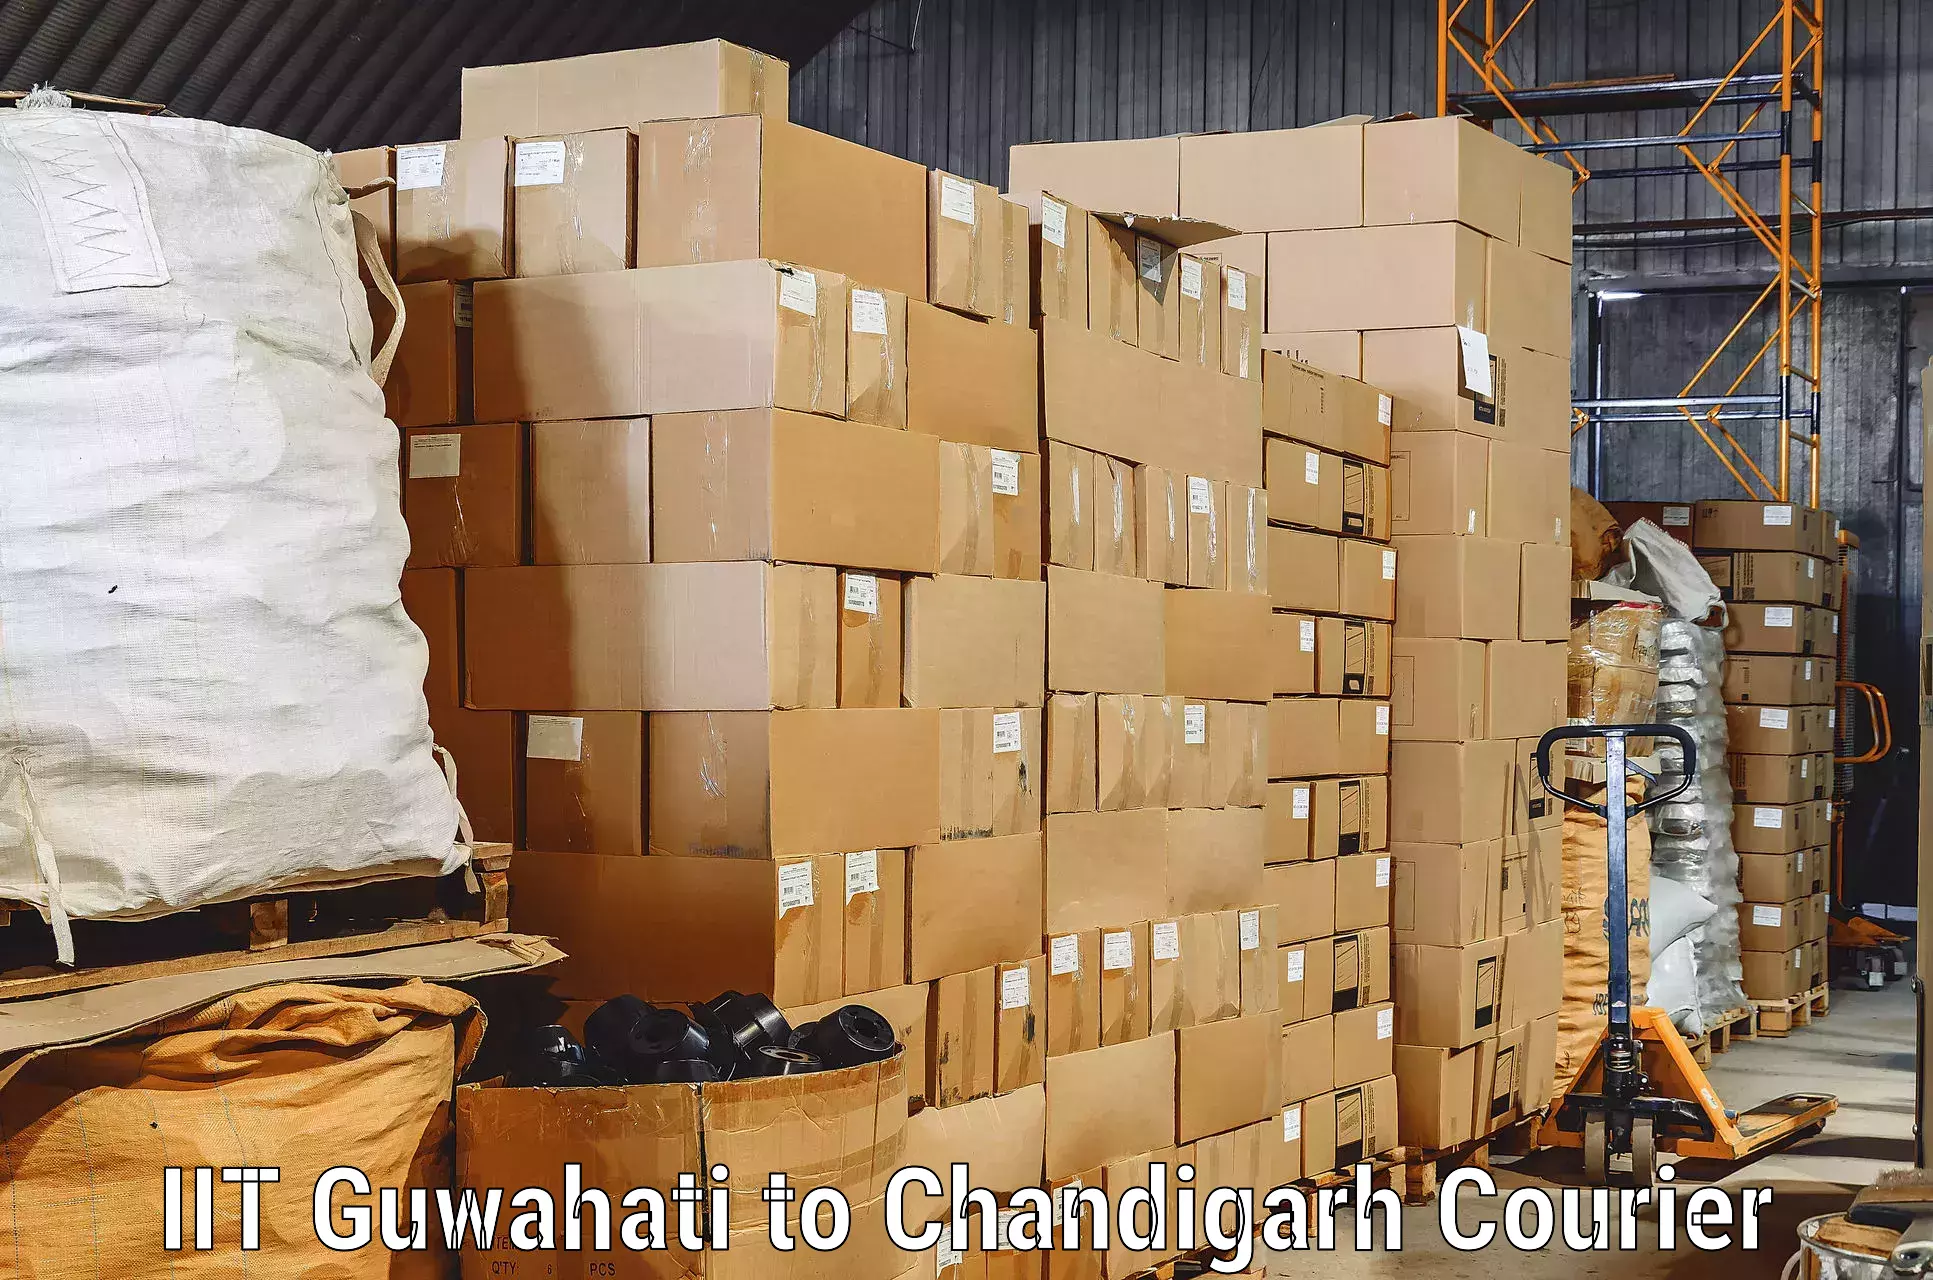 Moving and packing experts IIT Guwahati to Chandigarh